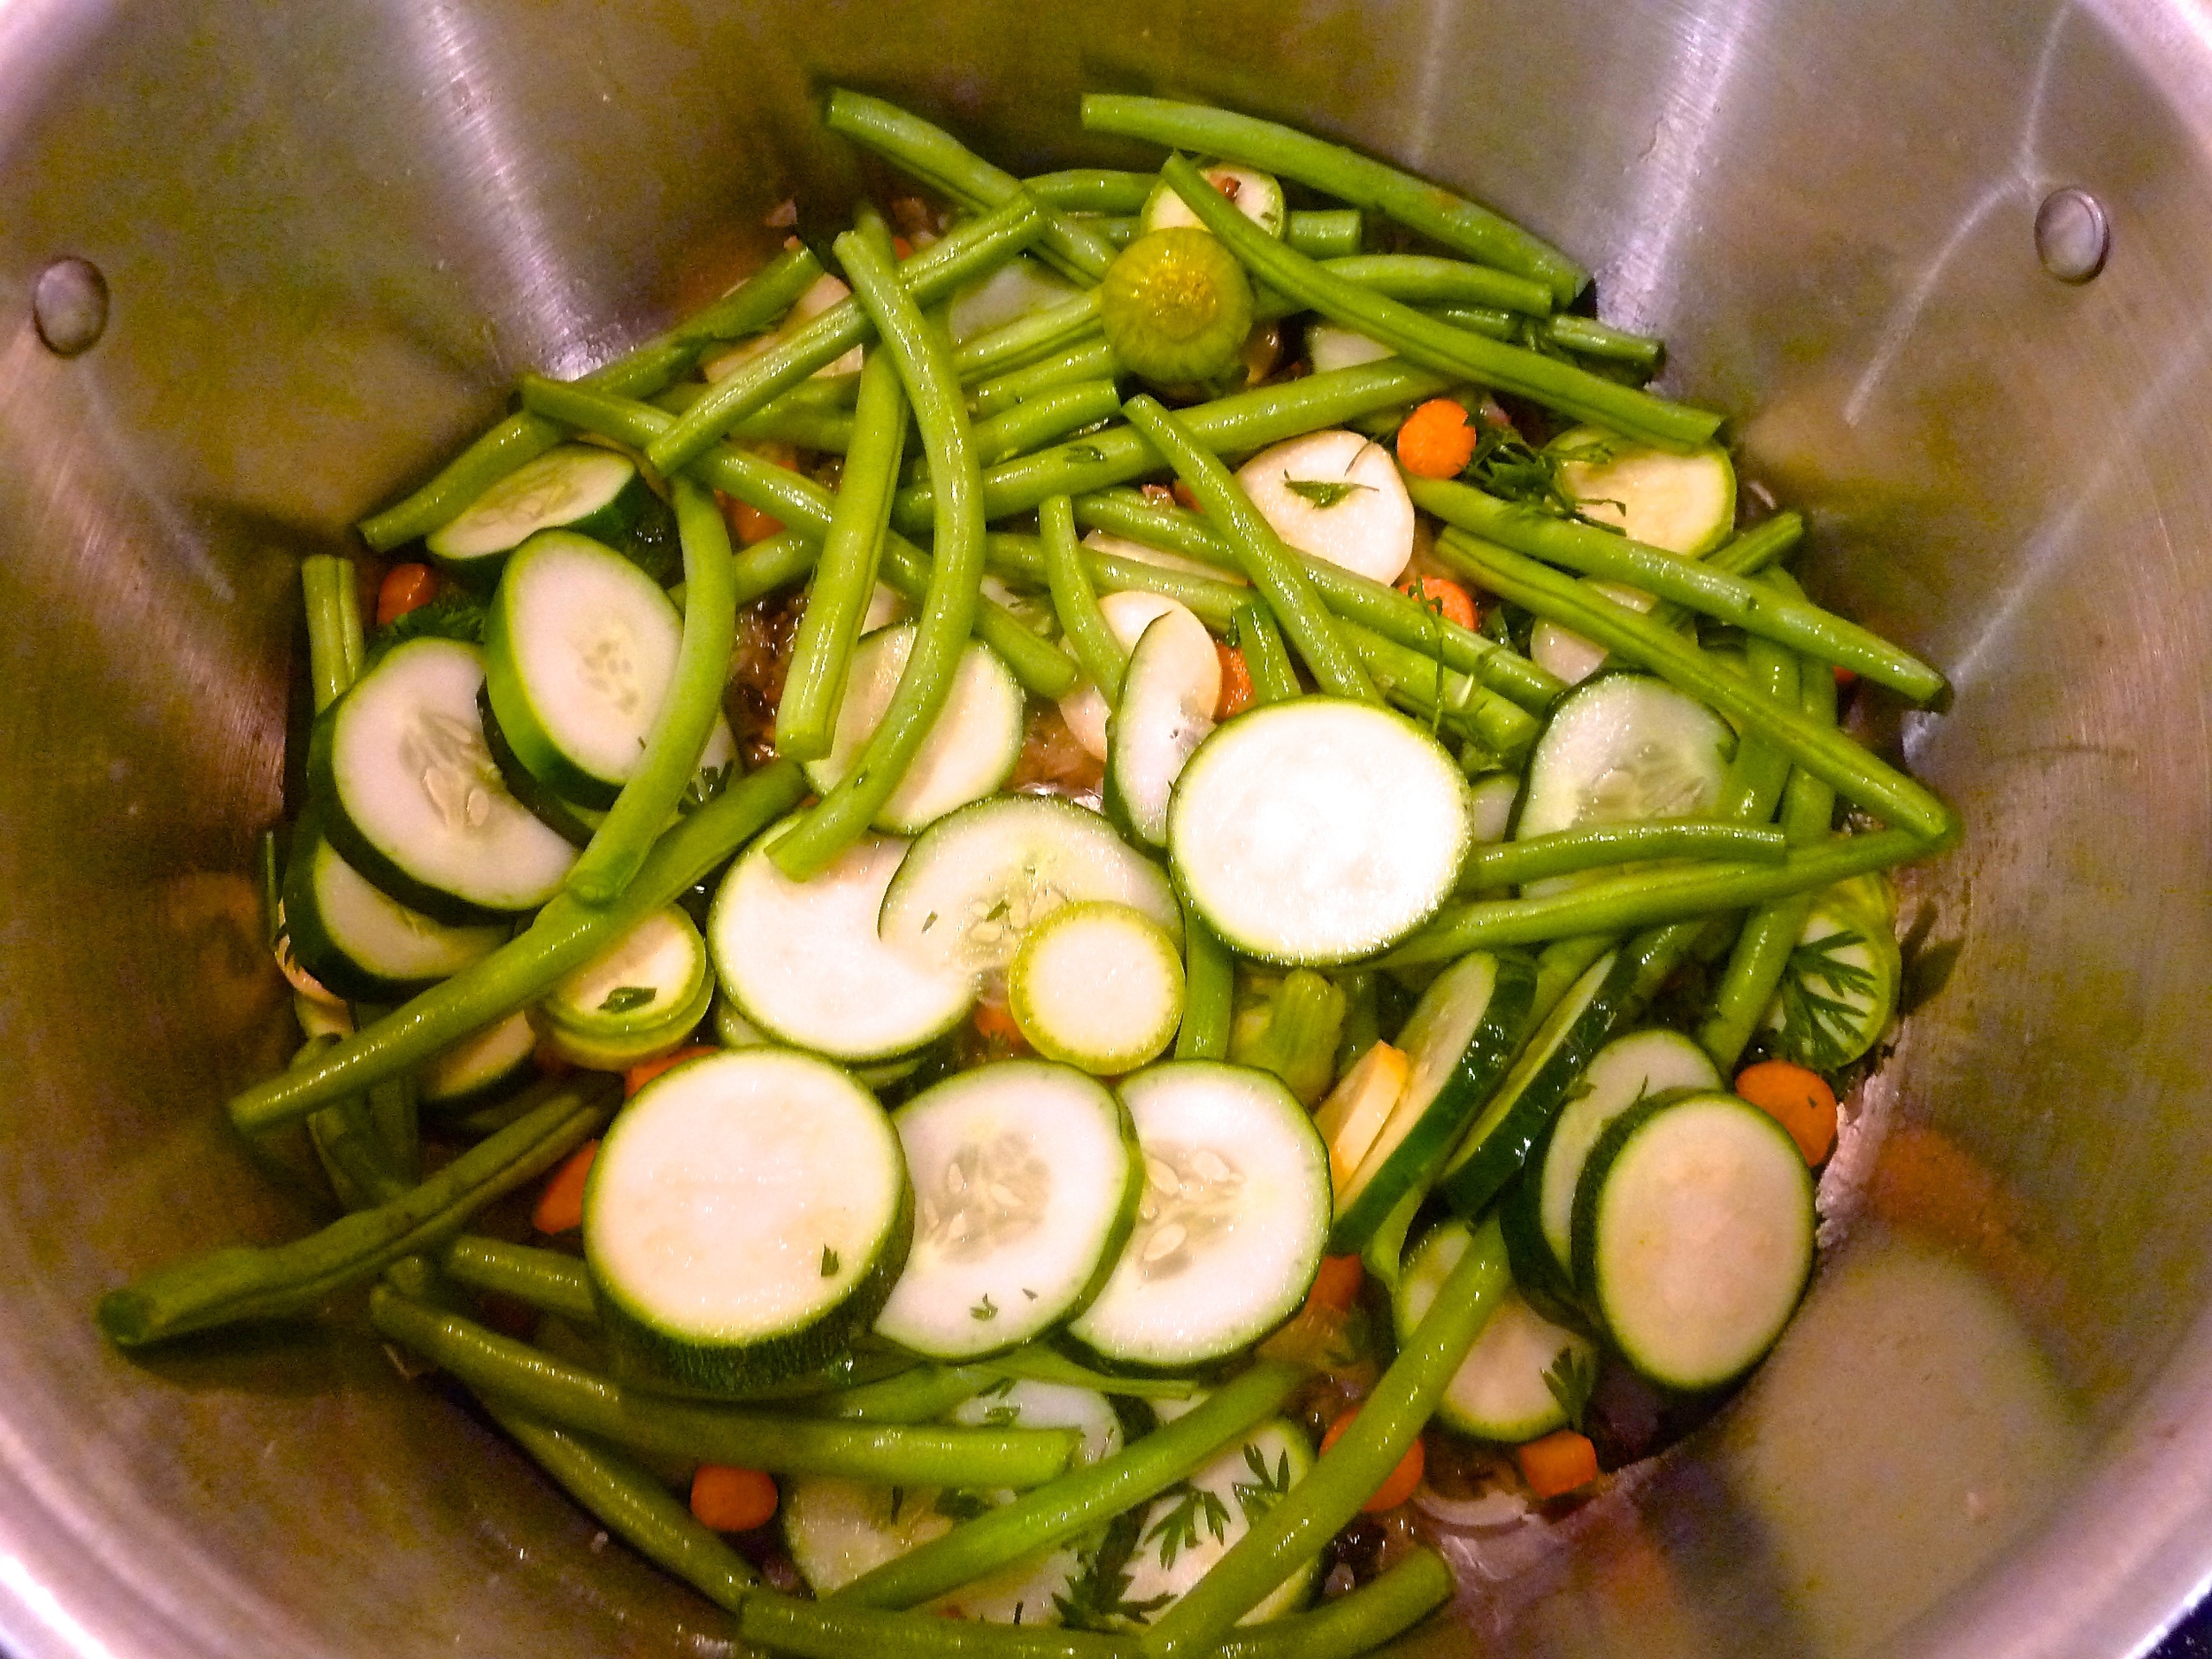 Dump all Veges In the Pot